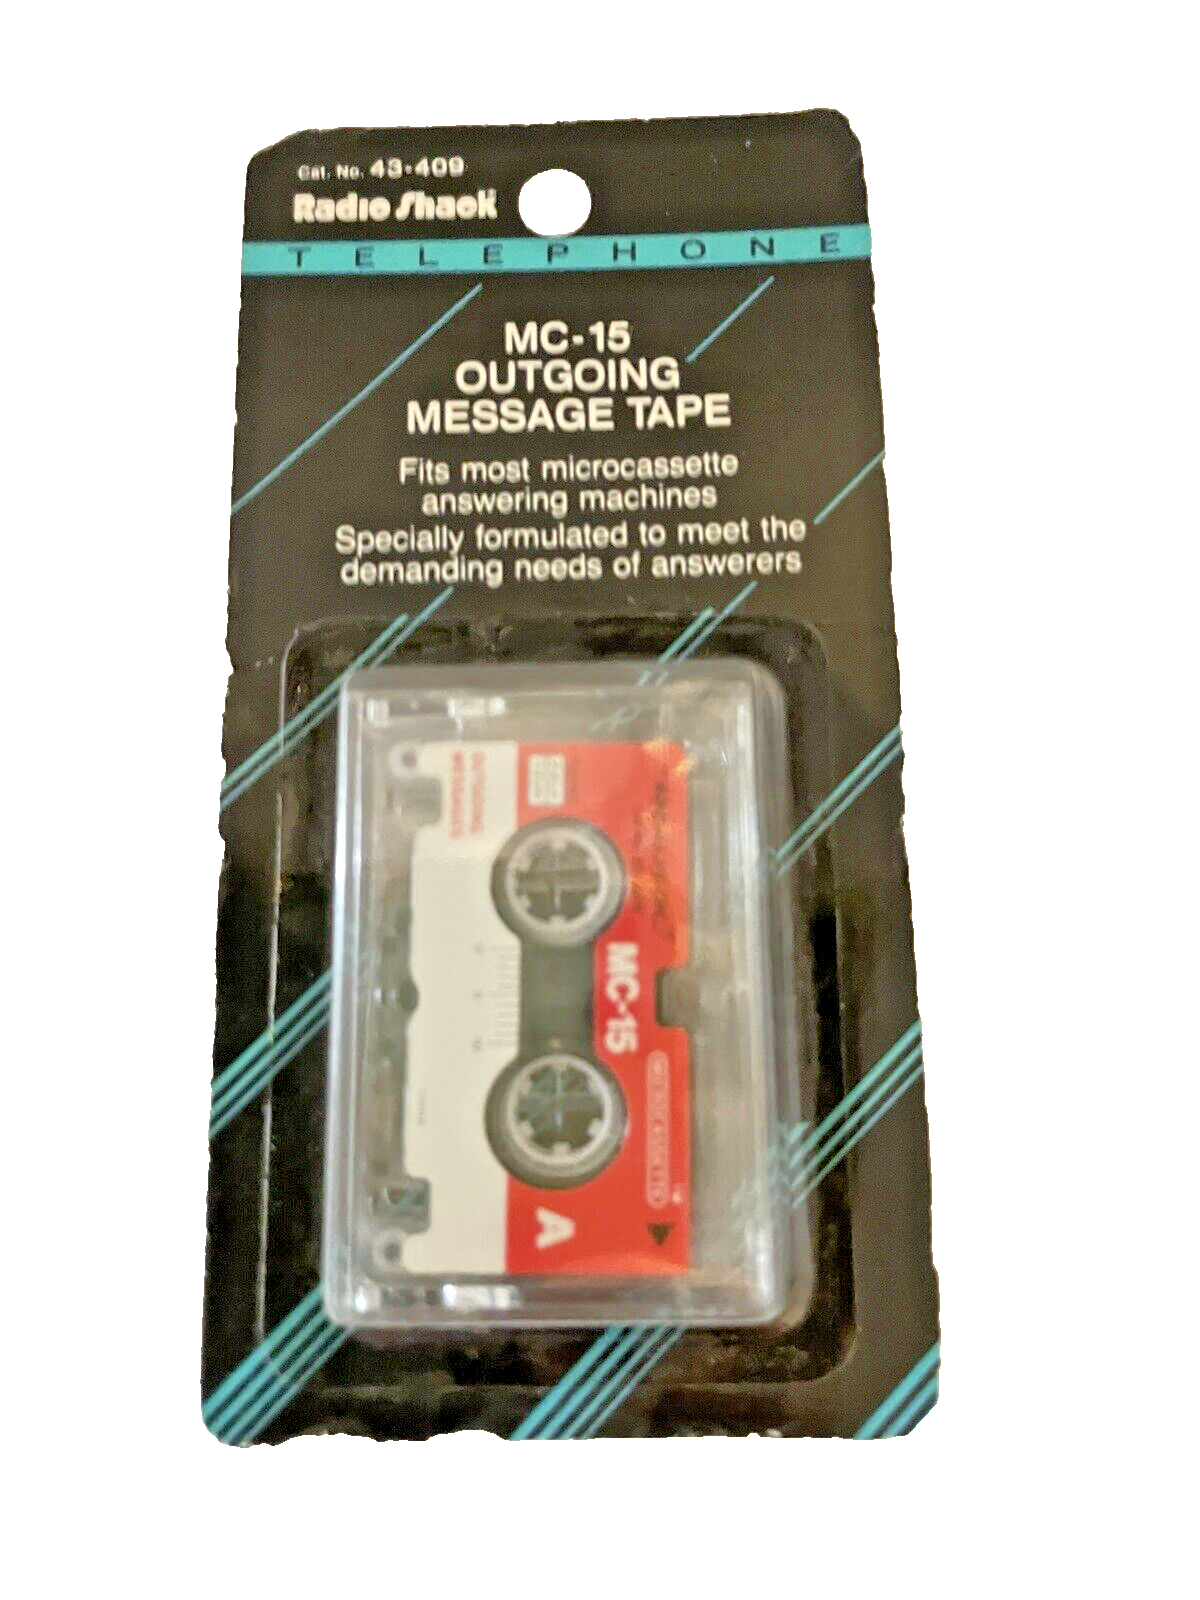 Microcassette Message Tape NOS Realistic Telephone MC-15 Outgoing Radio Shack - $12.07